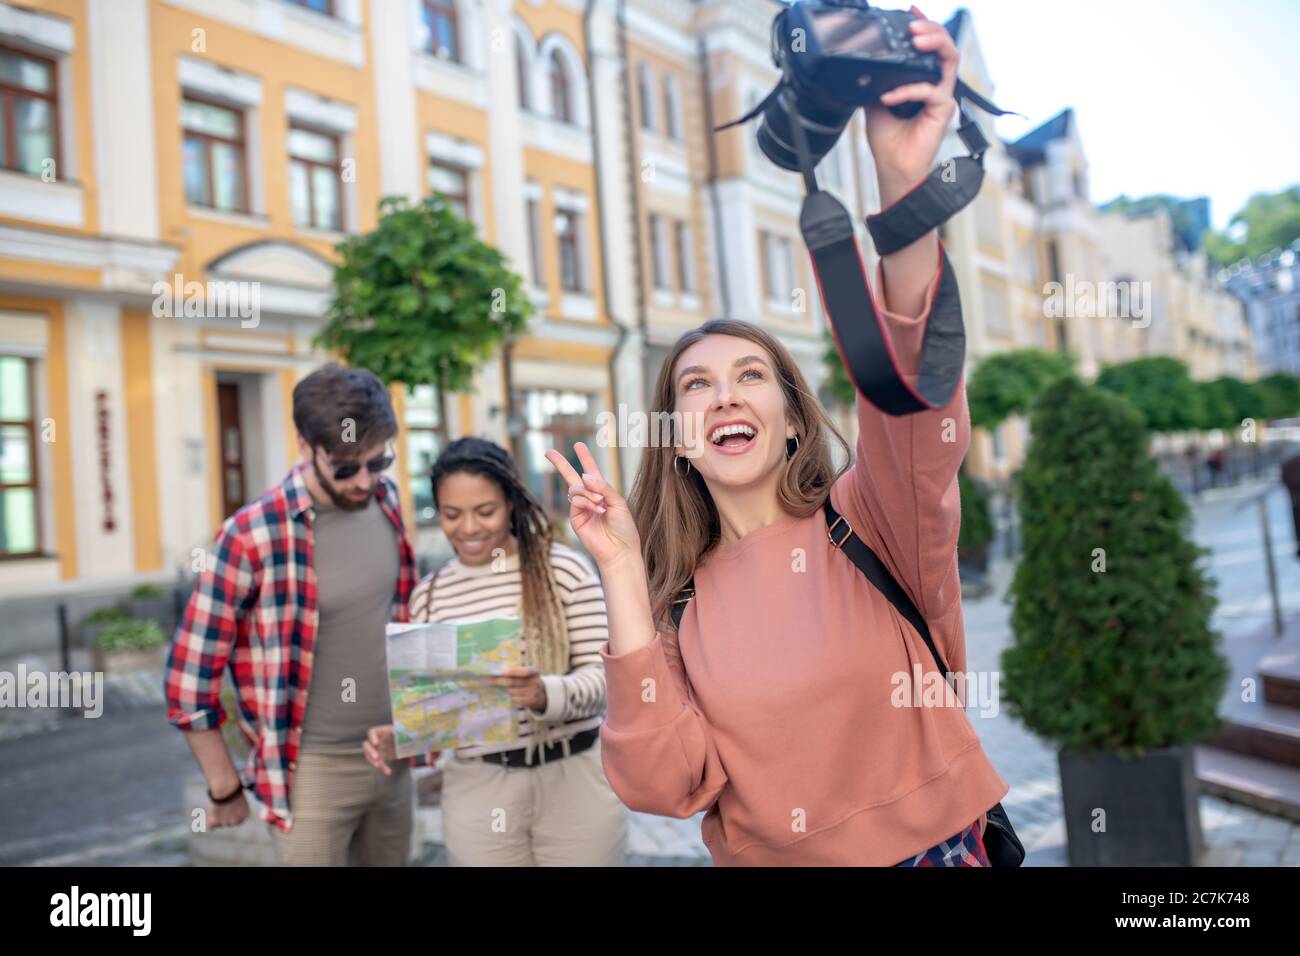 Happy girl with camera taking selfie friends at distance Stock Photo